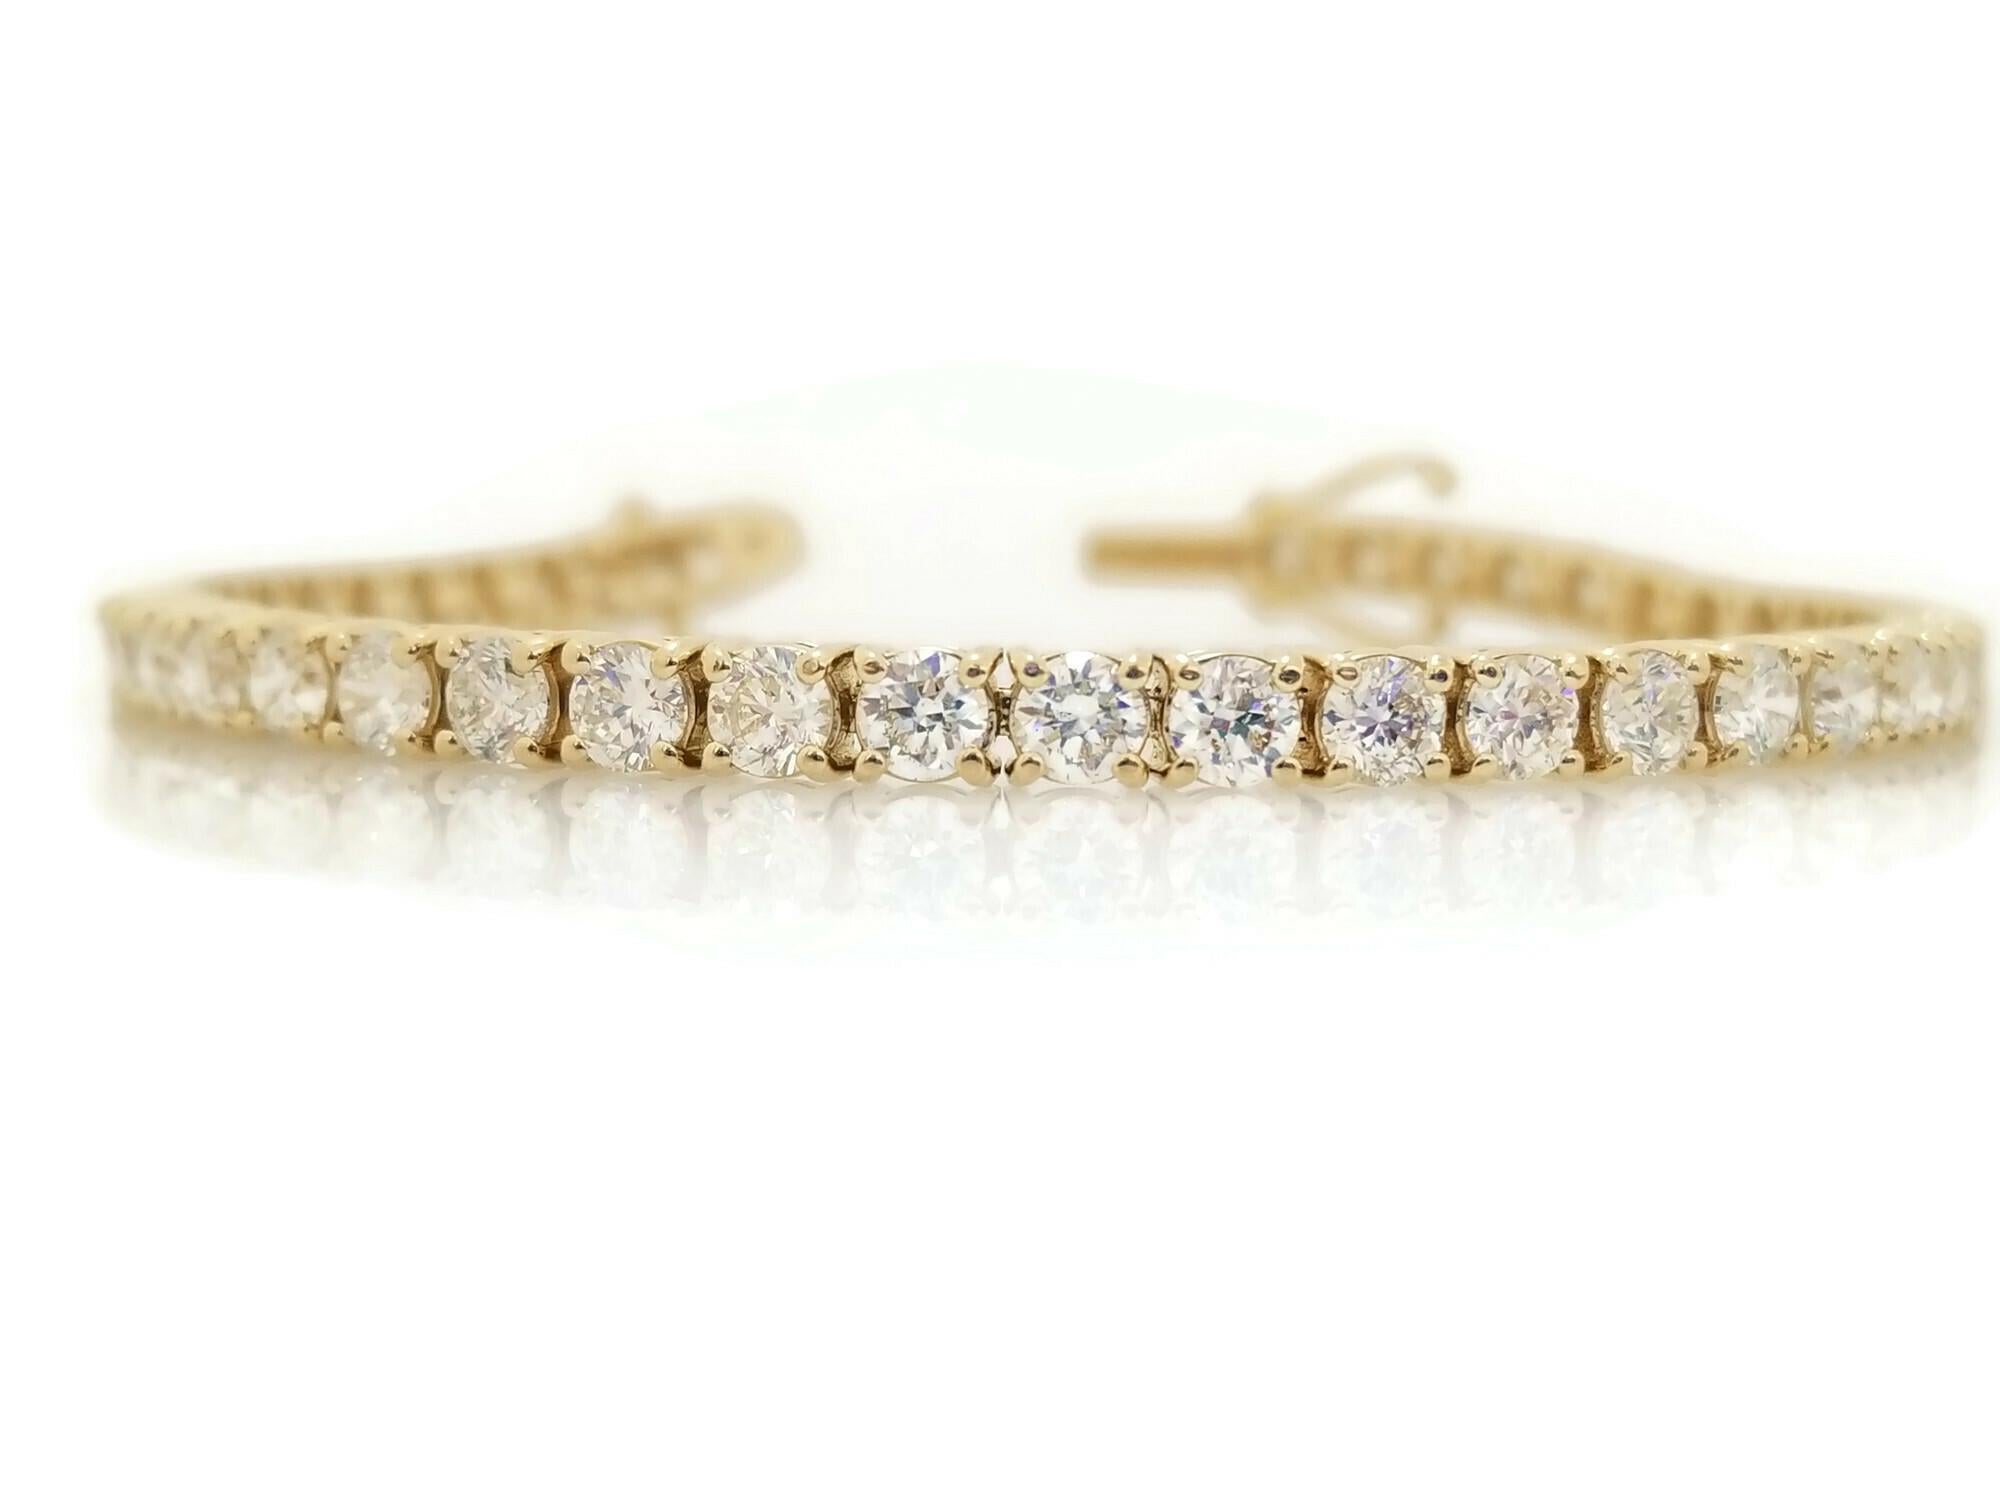 A quality tennis bracelet, round-brilliant cut diamonds. set on 14k yellow gold. each stone is set in a classic four-prong style for maximum light brilliance.
7 inch. Average Color H-I, Clarity VS-SI.